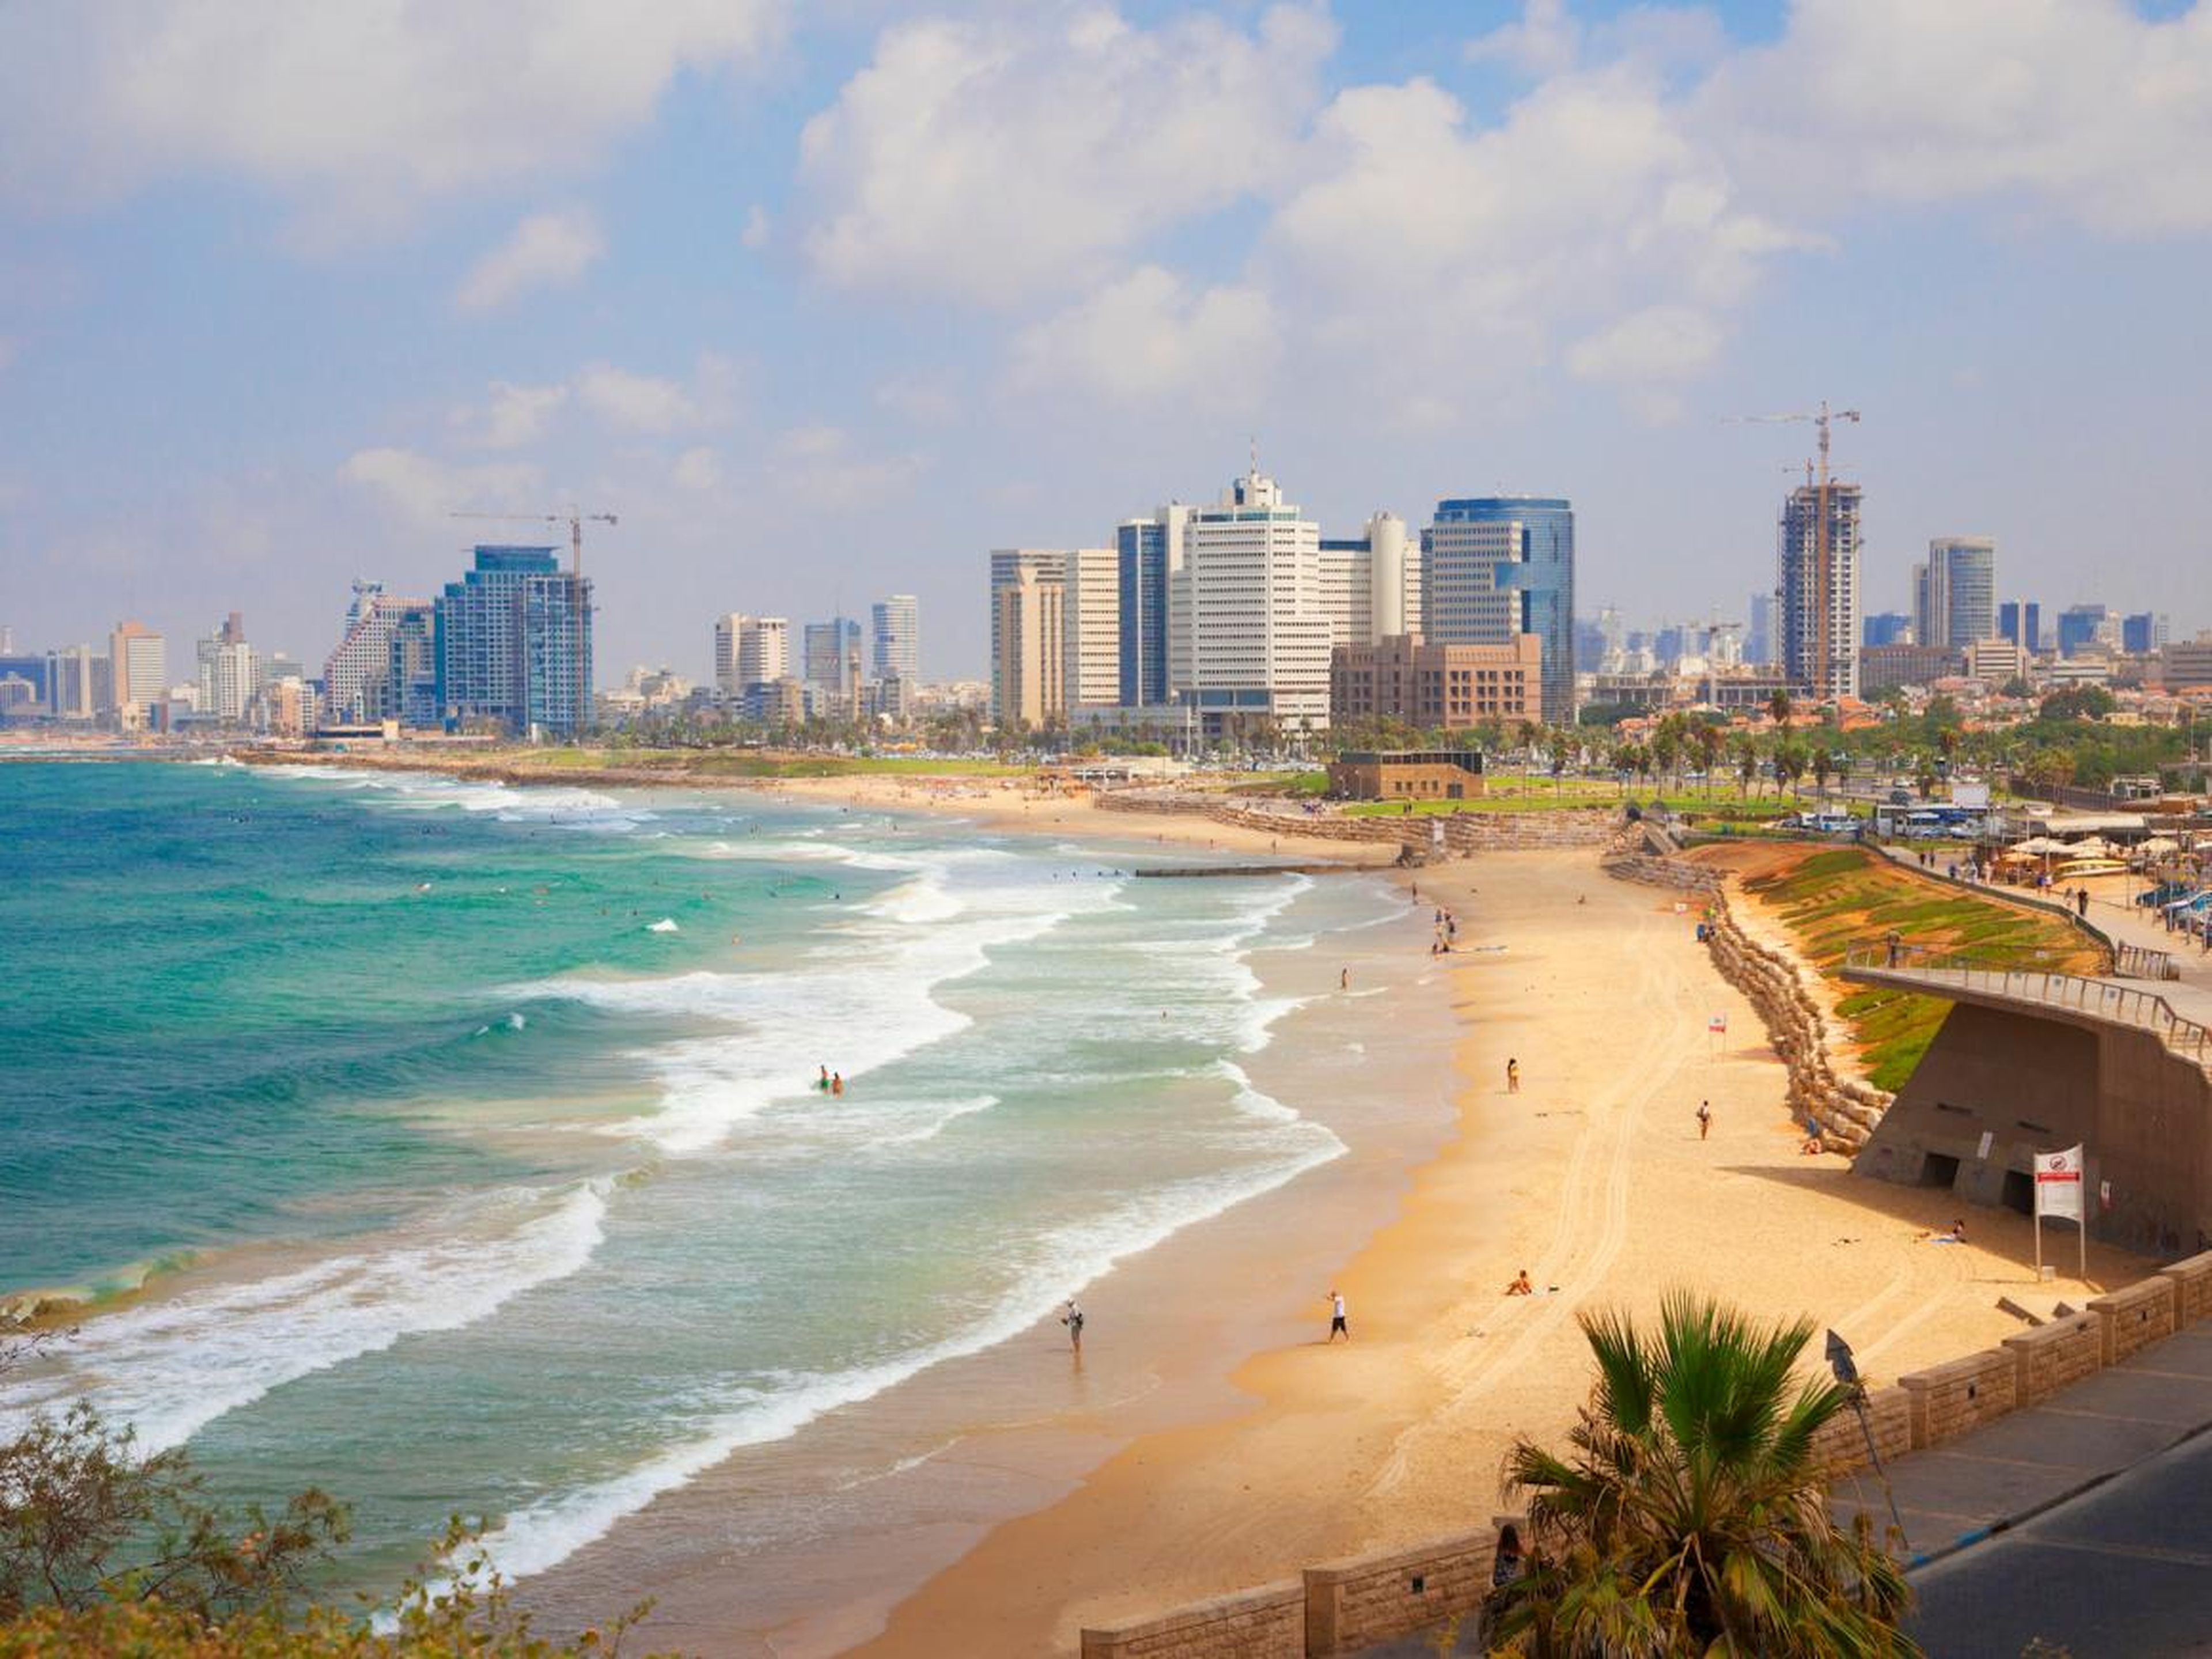 T12. Israel, and Tel Aviv in particular, has become a hotspot for tech startups and luxury real estate.